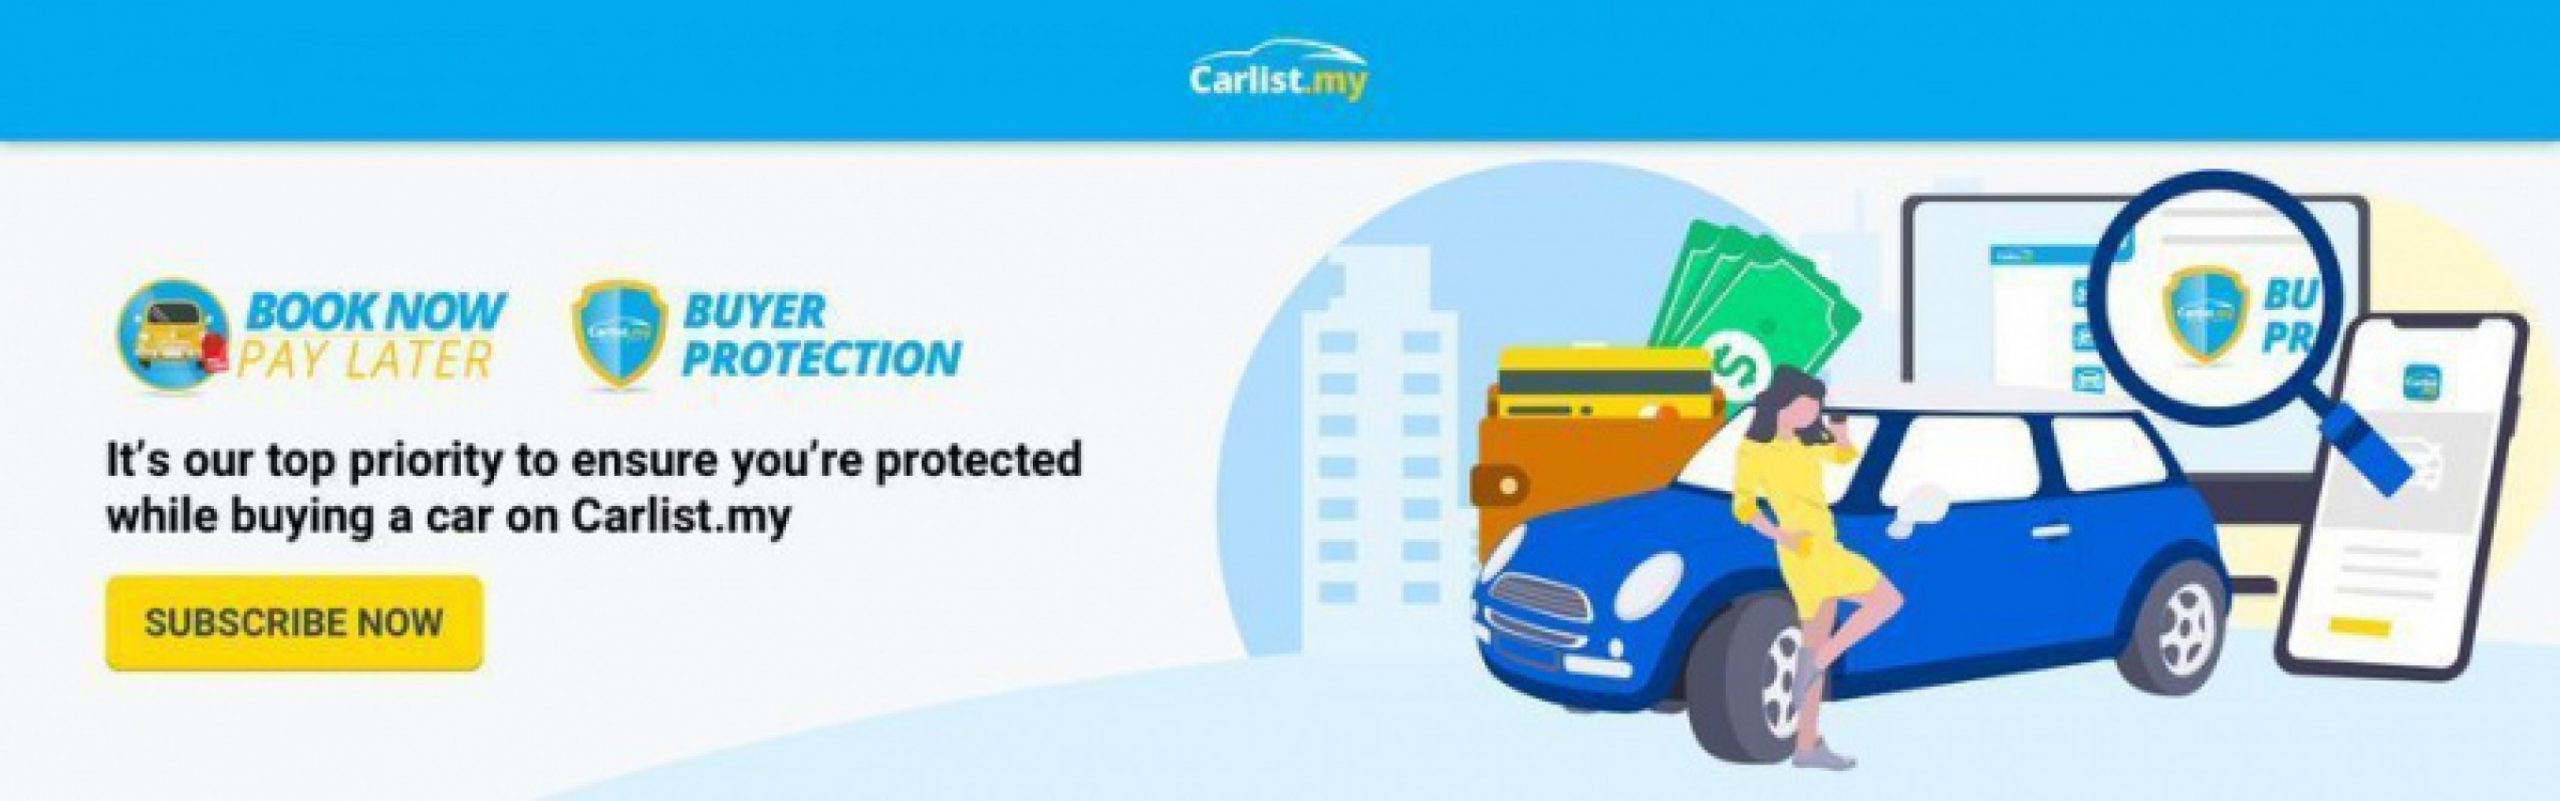 autos, cars, ram, reviews, book now pay later, buyer protection, insights, what hidden charges? have no fear, carlist.my buyer protection program is here